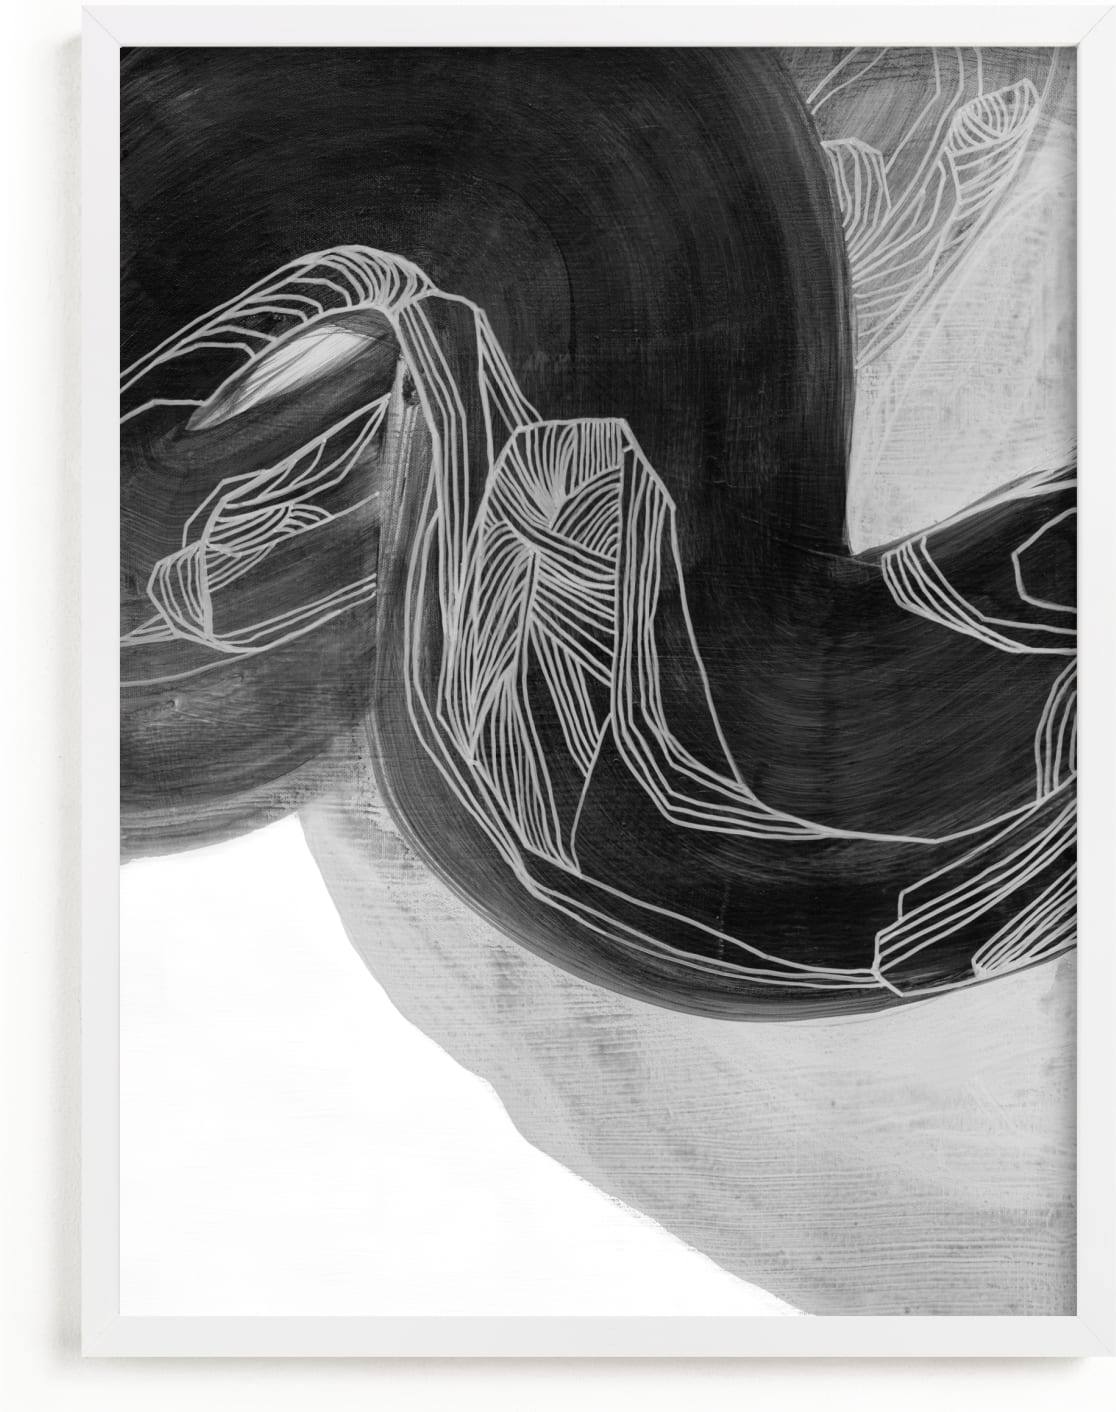 This is a black and white, white, grey art by Kirsta Benedetti called Black Brush 2.